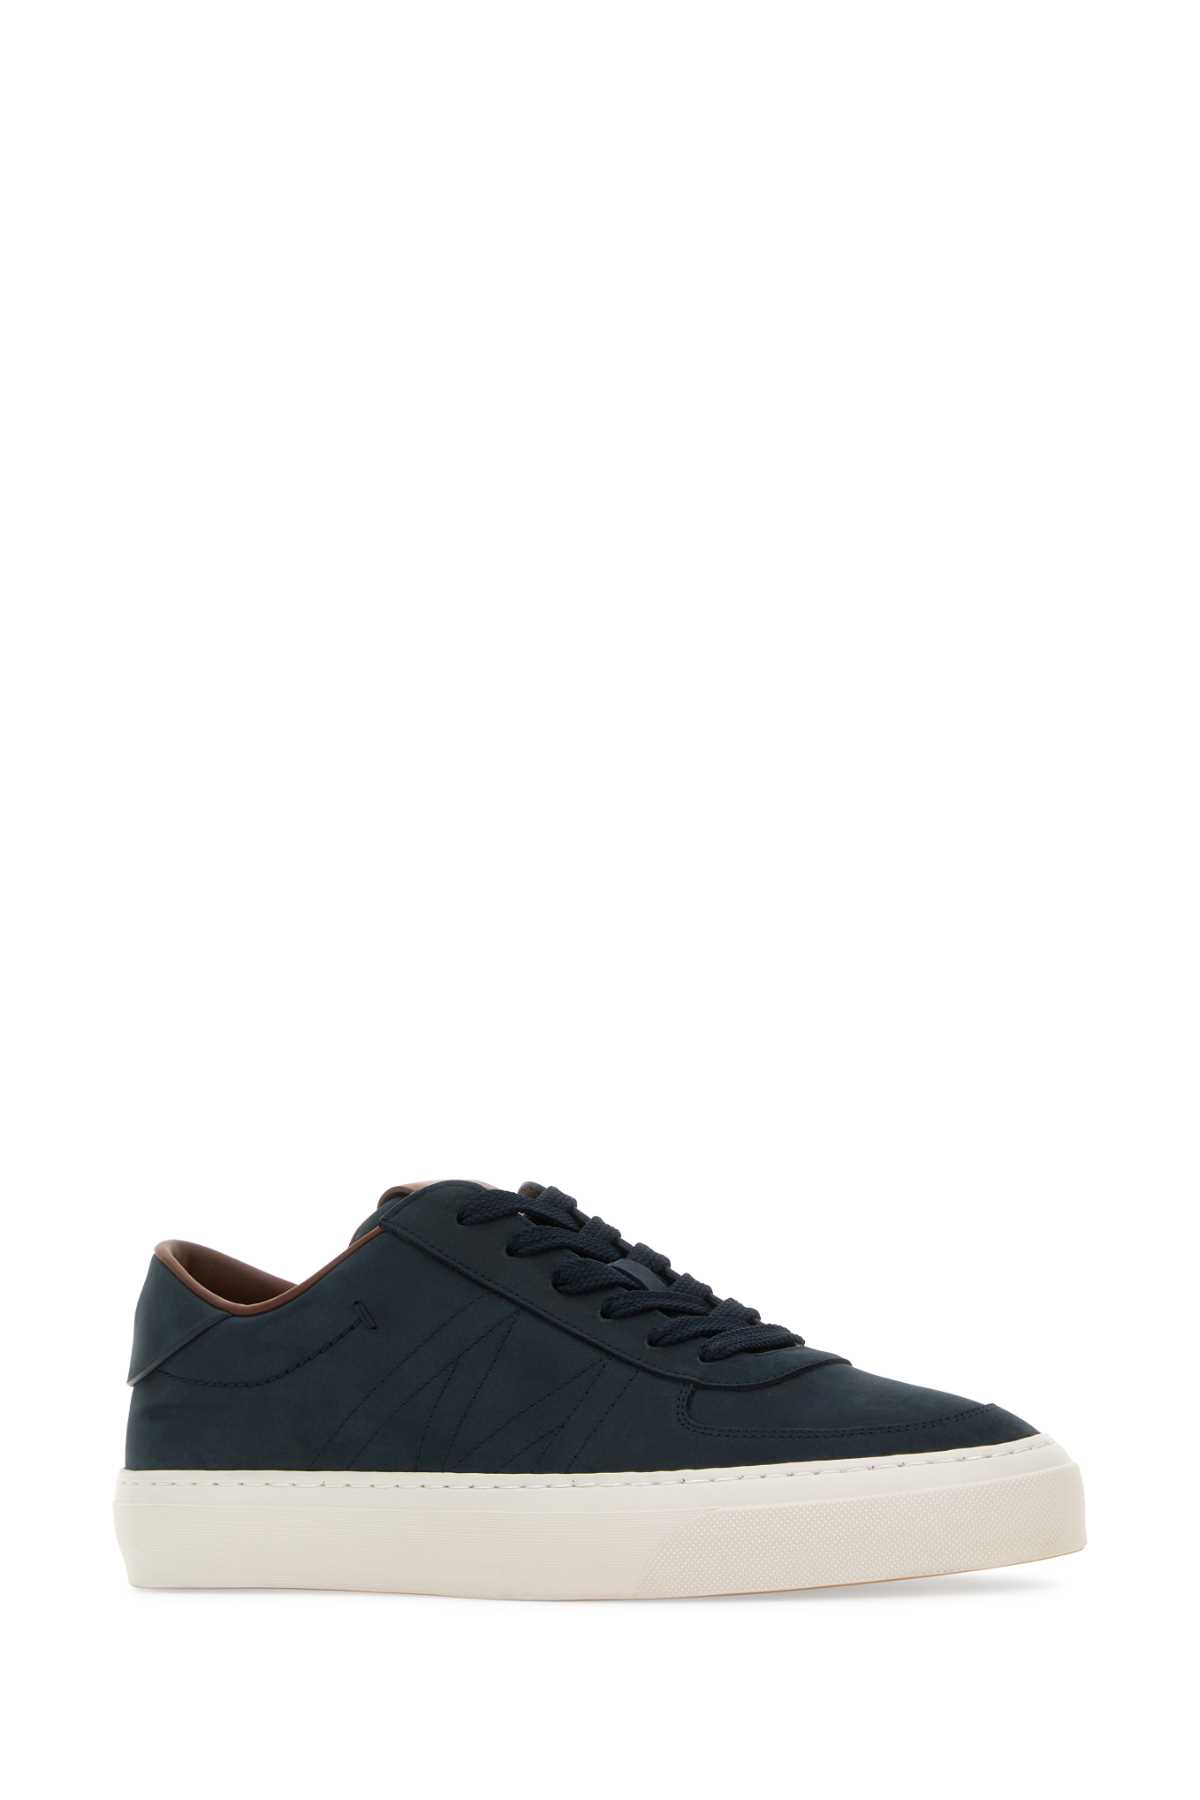 MONCLER MIDNIGHT BLUE LEATHER MONCLUB SNEAKERS